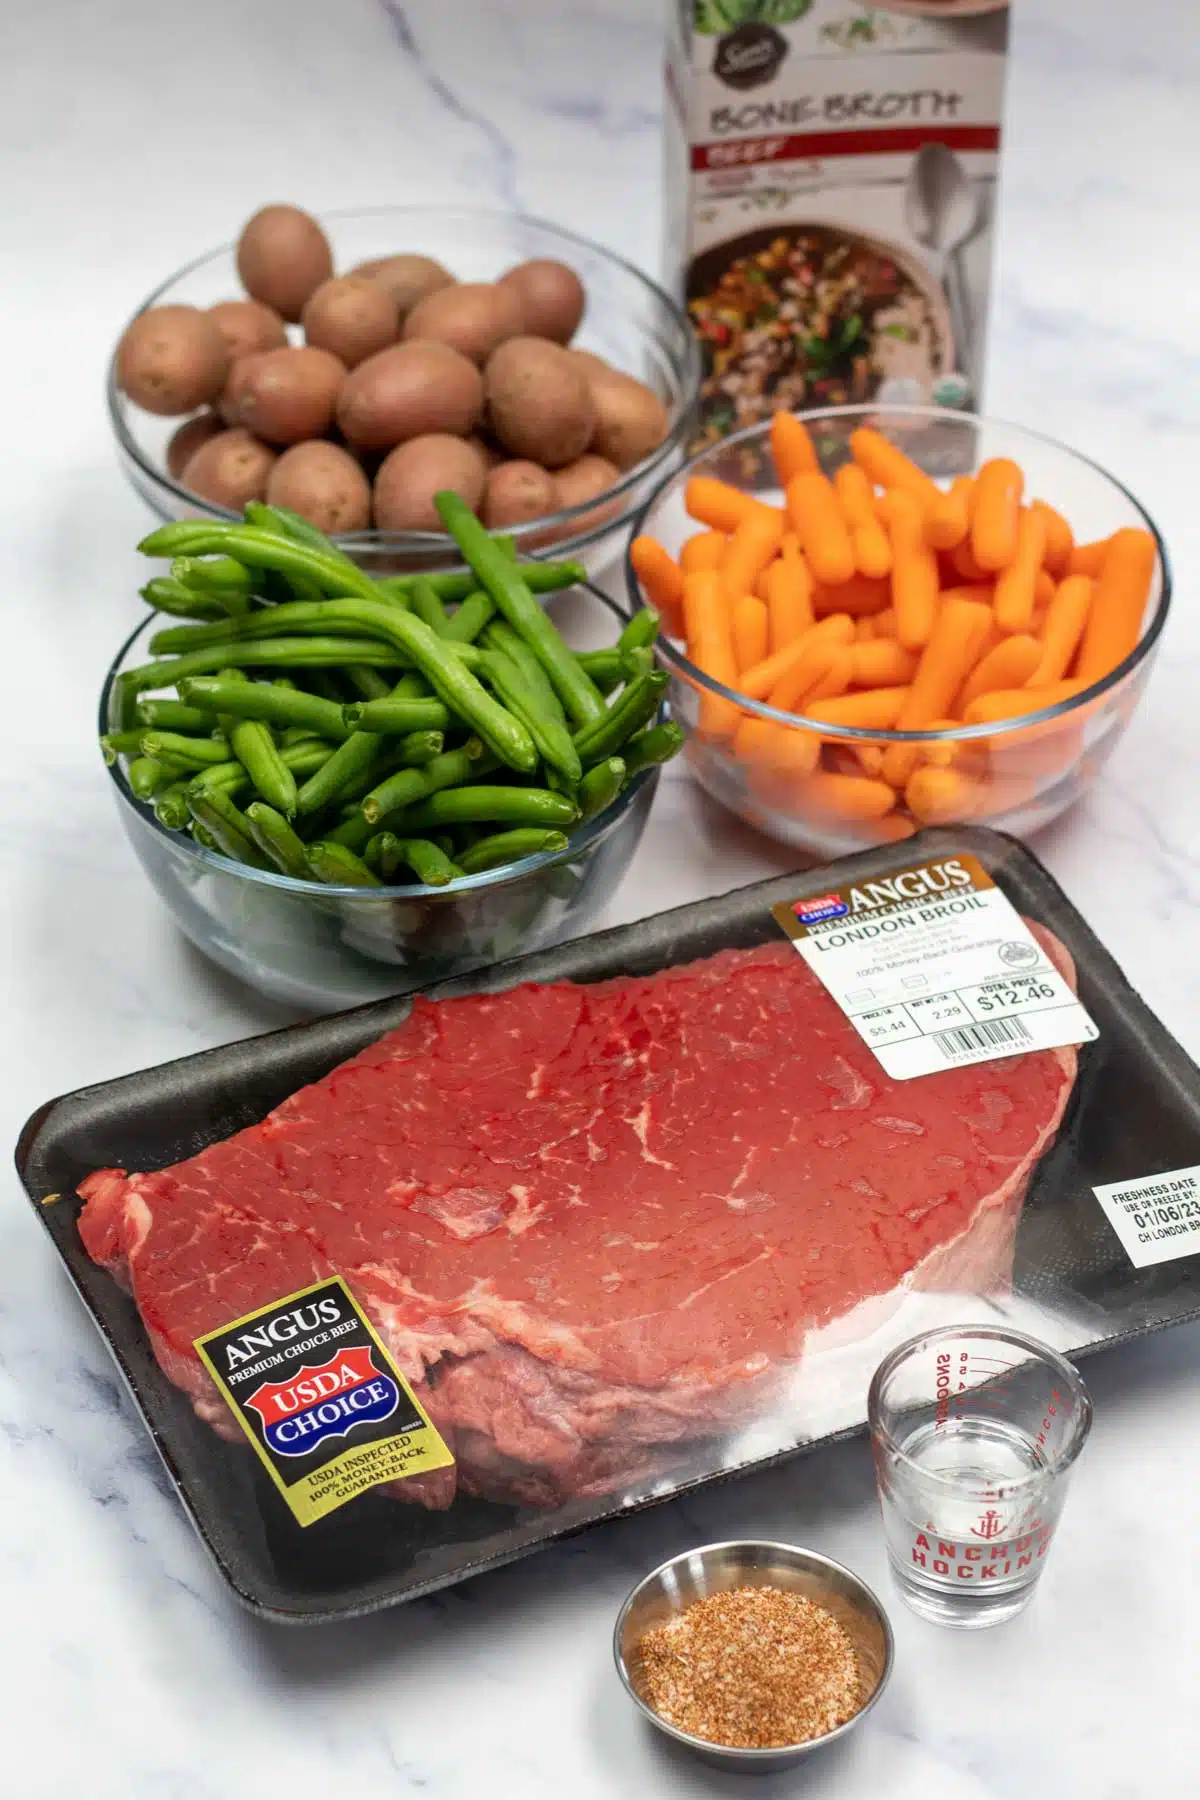 Tall image showing slow cooker London broil ingredients.